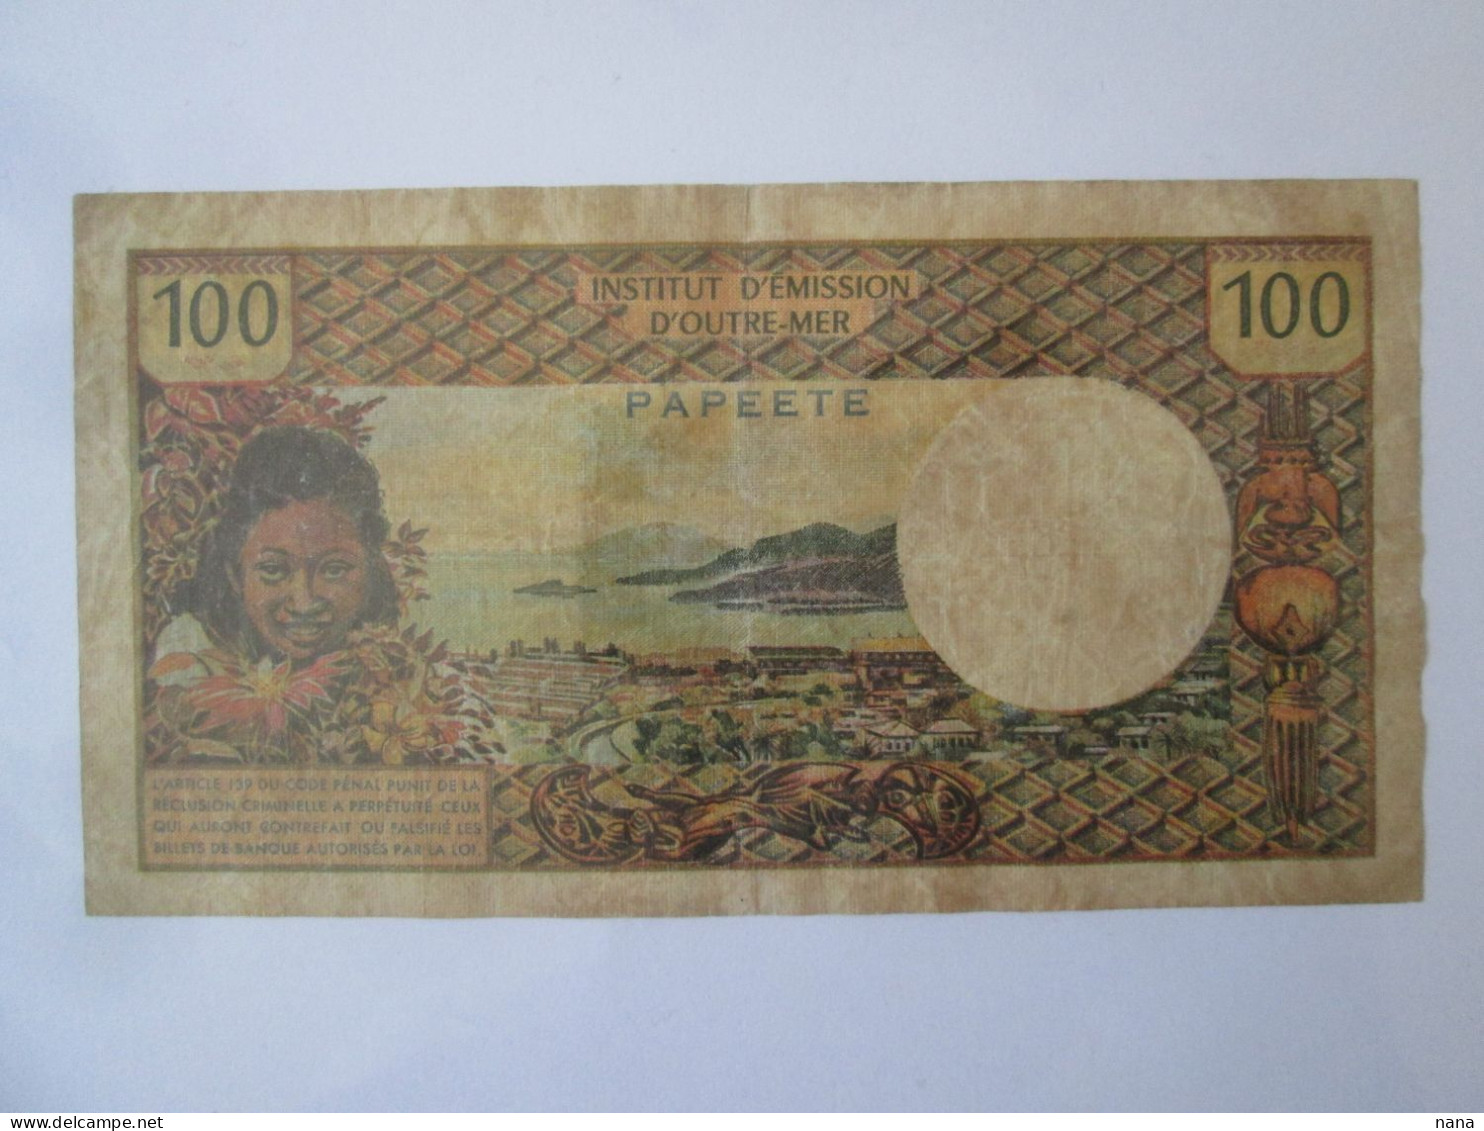 Papeete(Tahiti) 100 Francs 1968 Banknote,see Pictures - Papeete (Französisch-Polynesien 1914-1985)